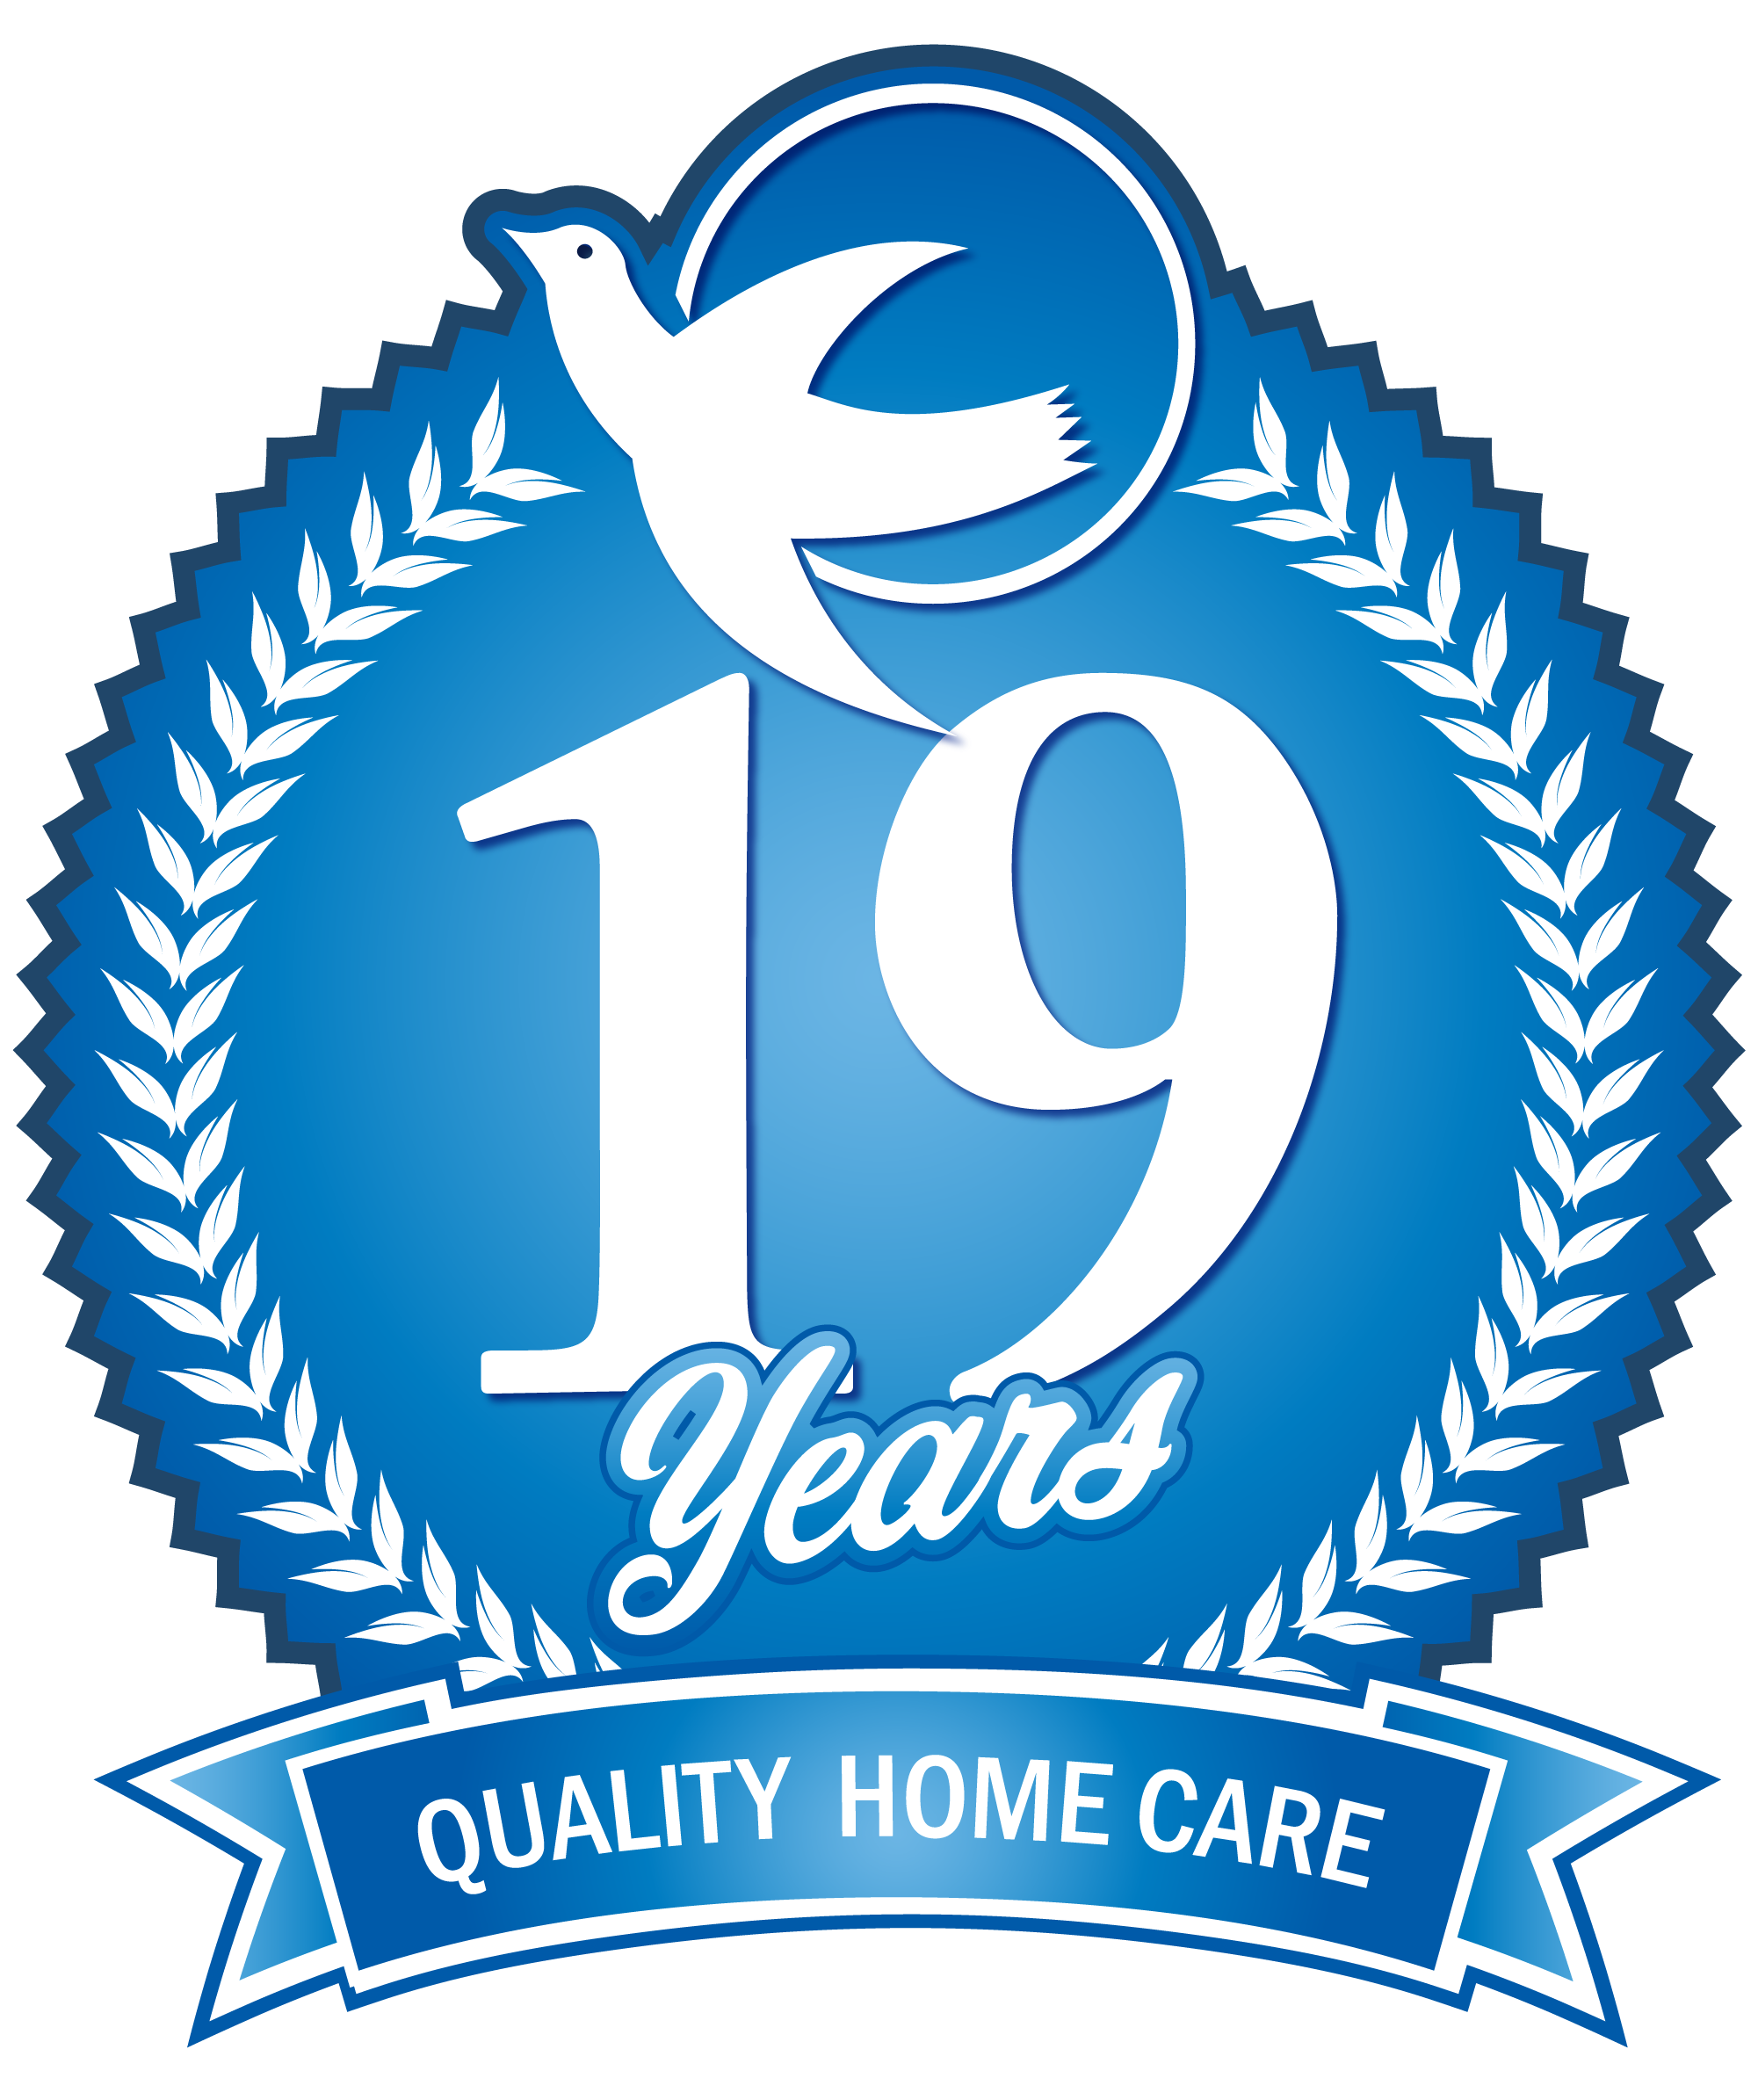 19 years of quality home care badge